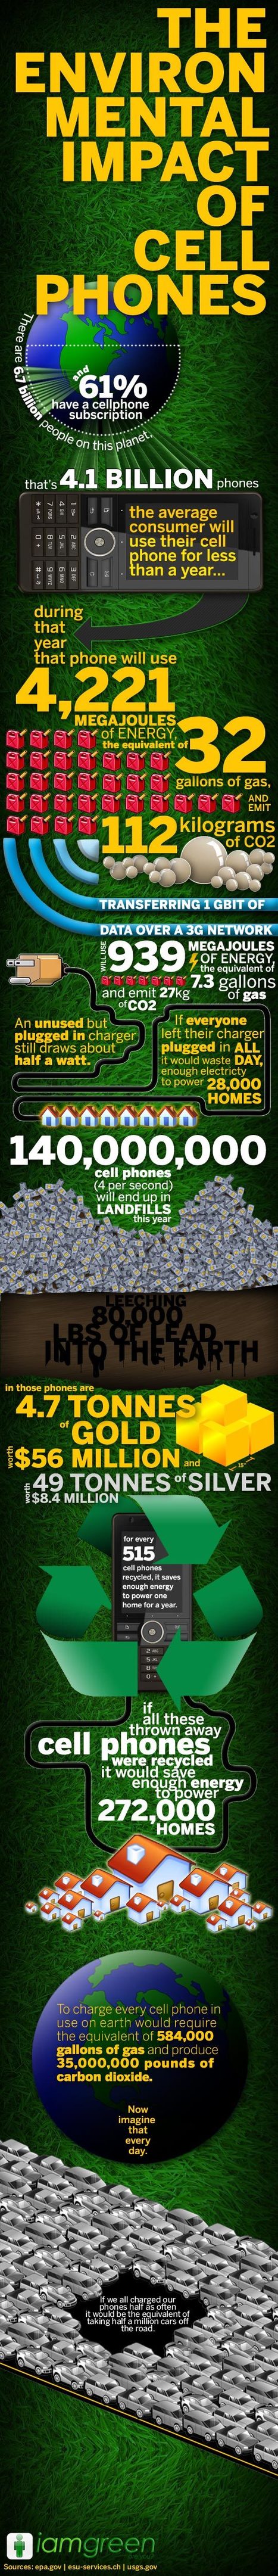 The Environmental Impact Of Cell Phones | Visual.ly | Education & Numérique | Scoop.it